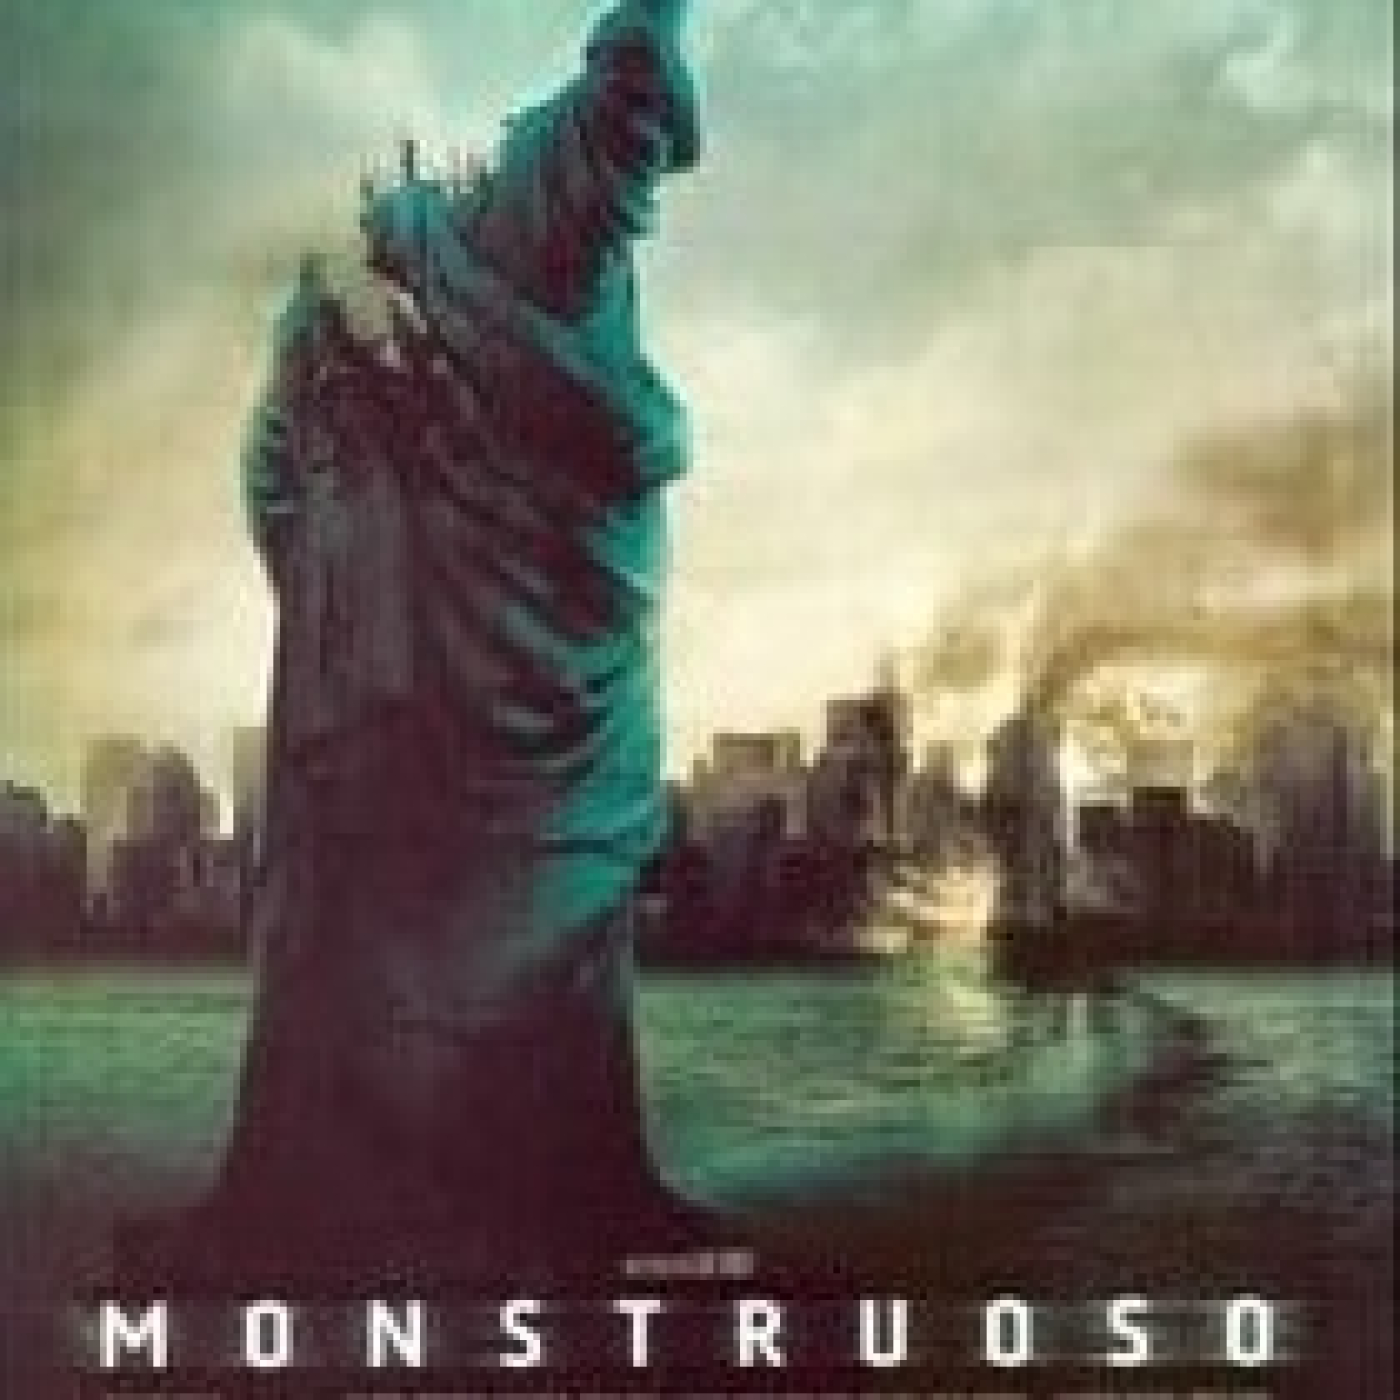 Movies Requests - Cloverfield - 2008